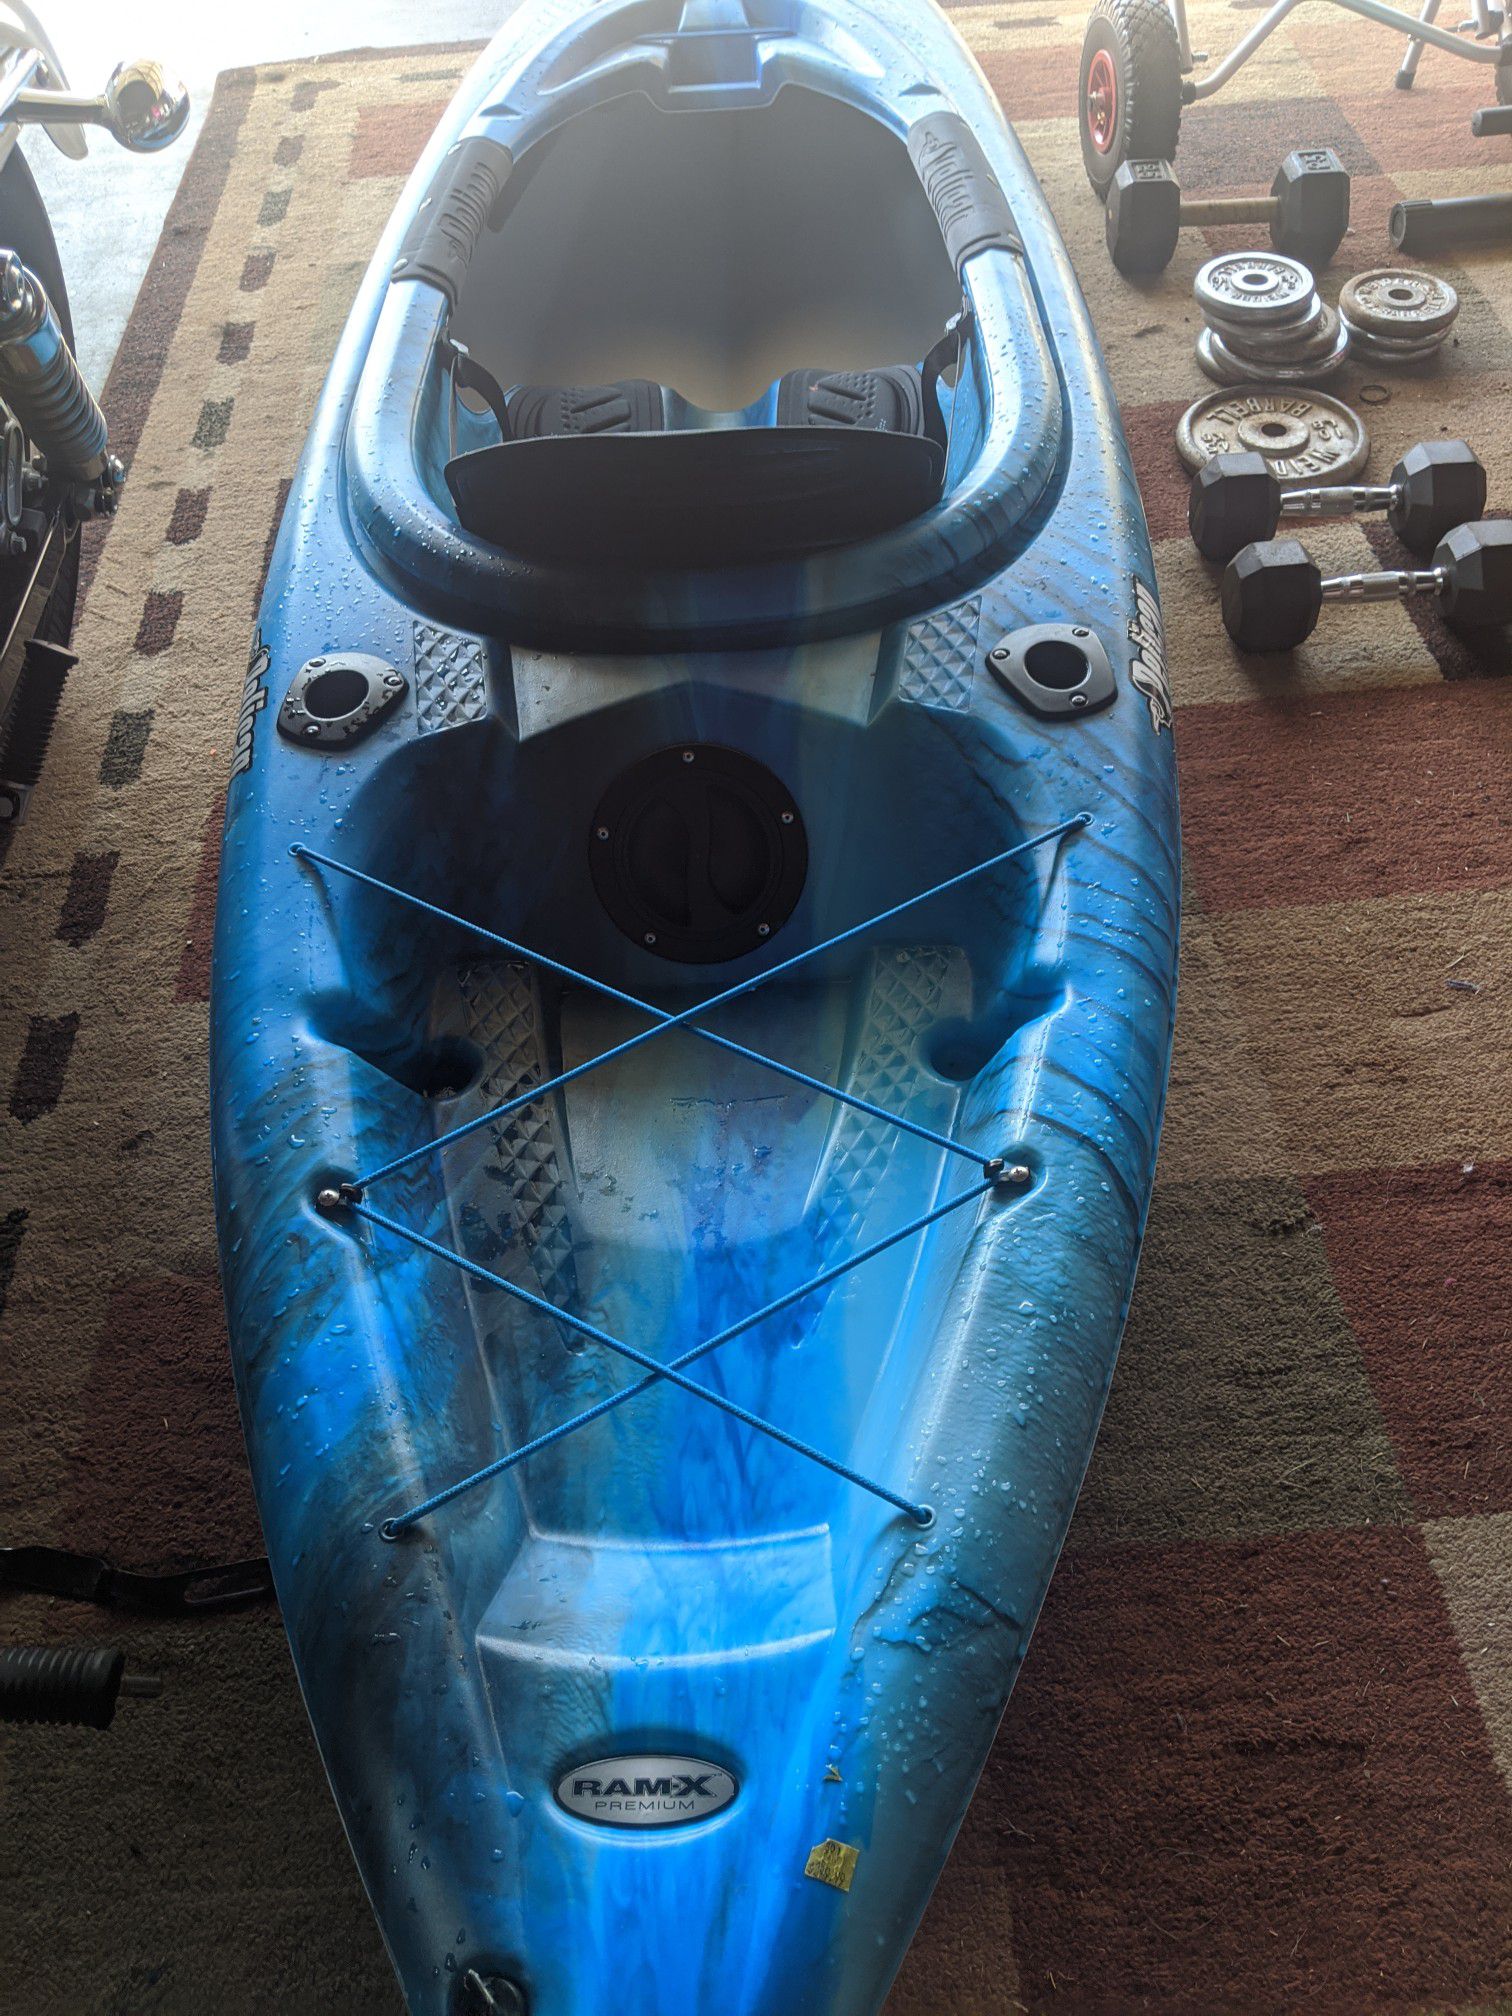 Hybrid kayak for cruising and fishing...great for lakes or ocean... about 1 year old with minor scuffs on the bottom..stored Indoors..pretty much. New